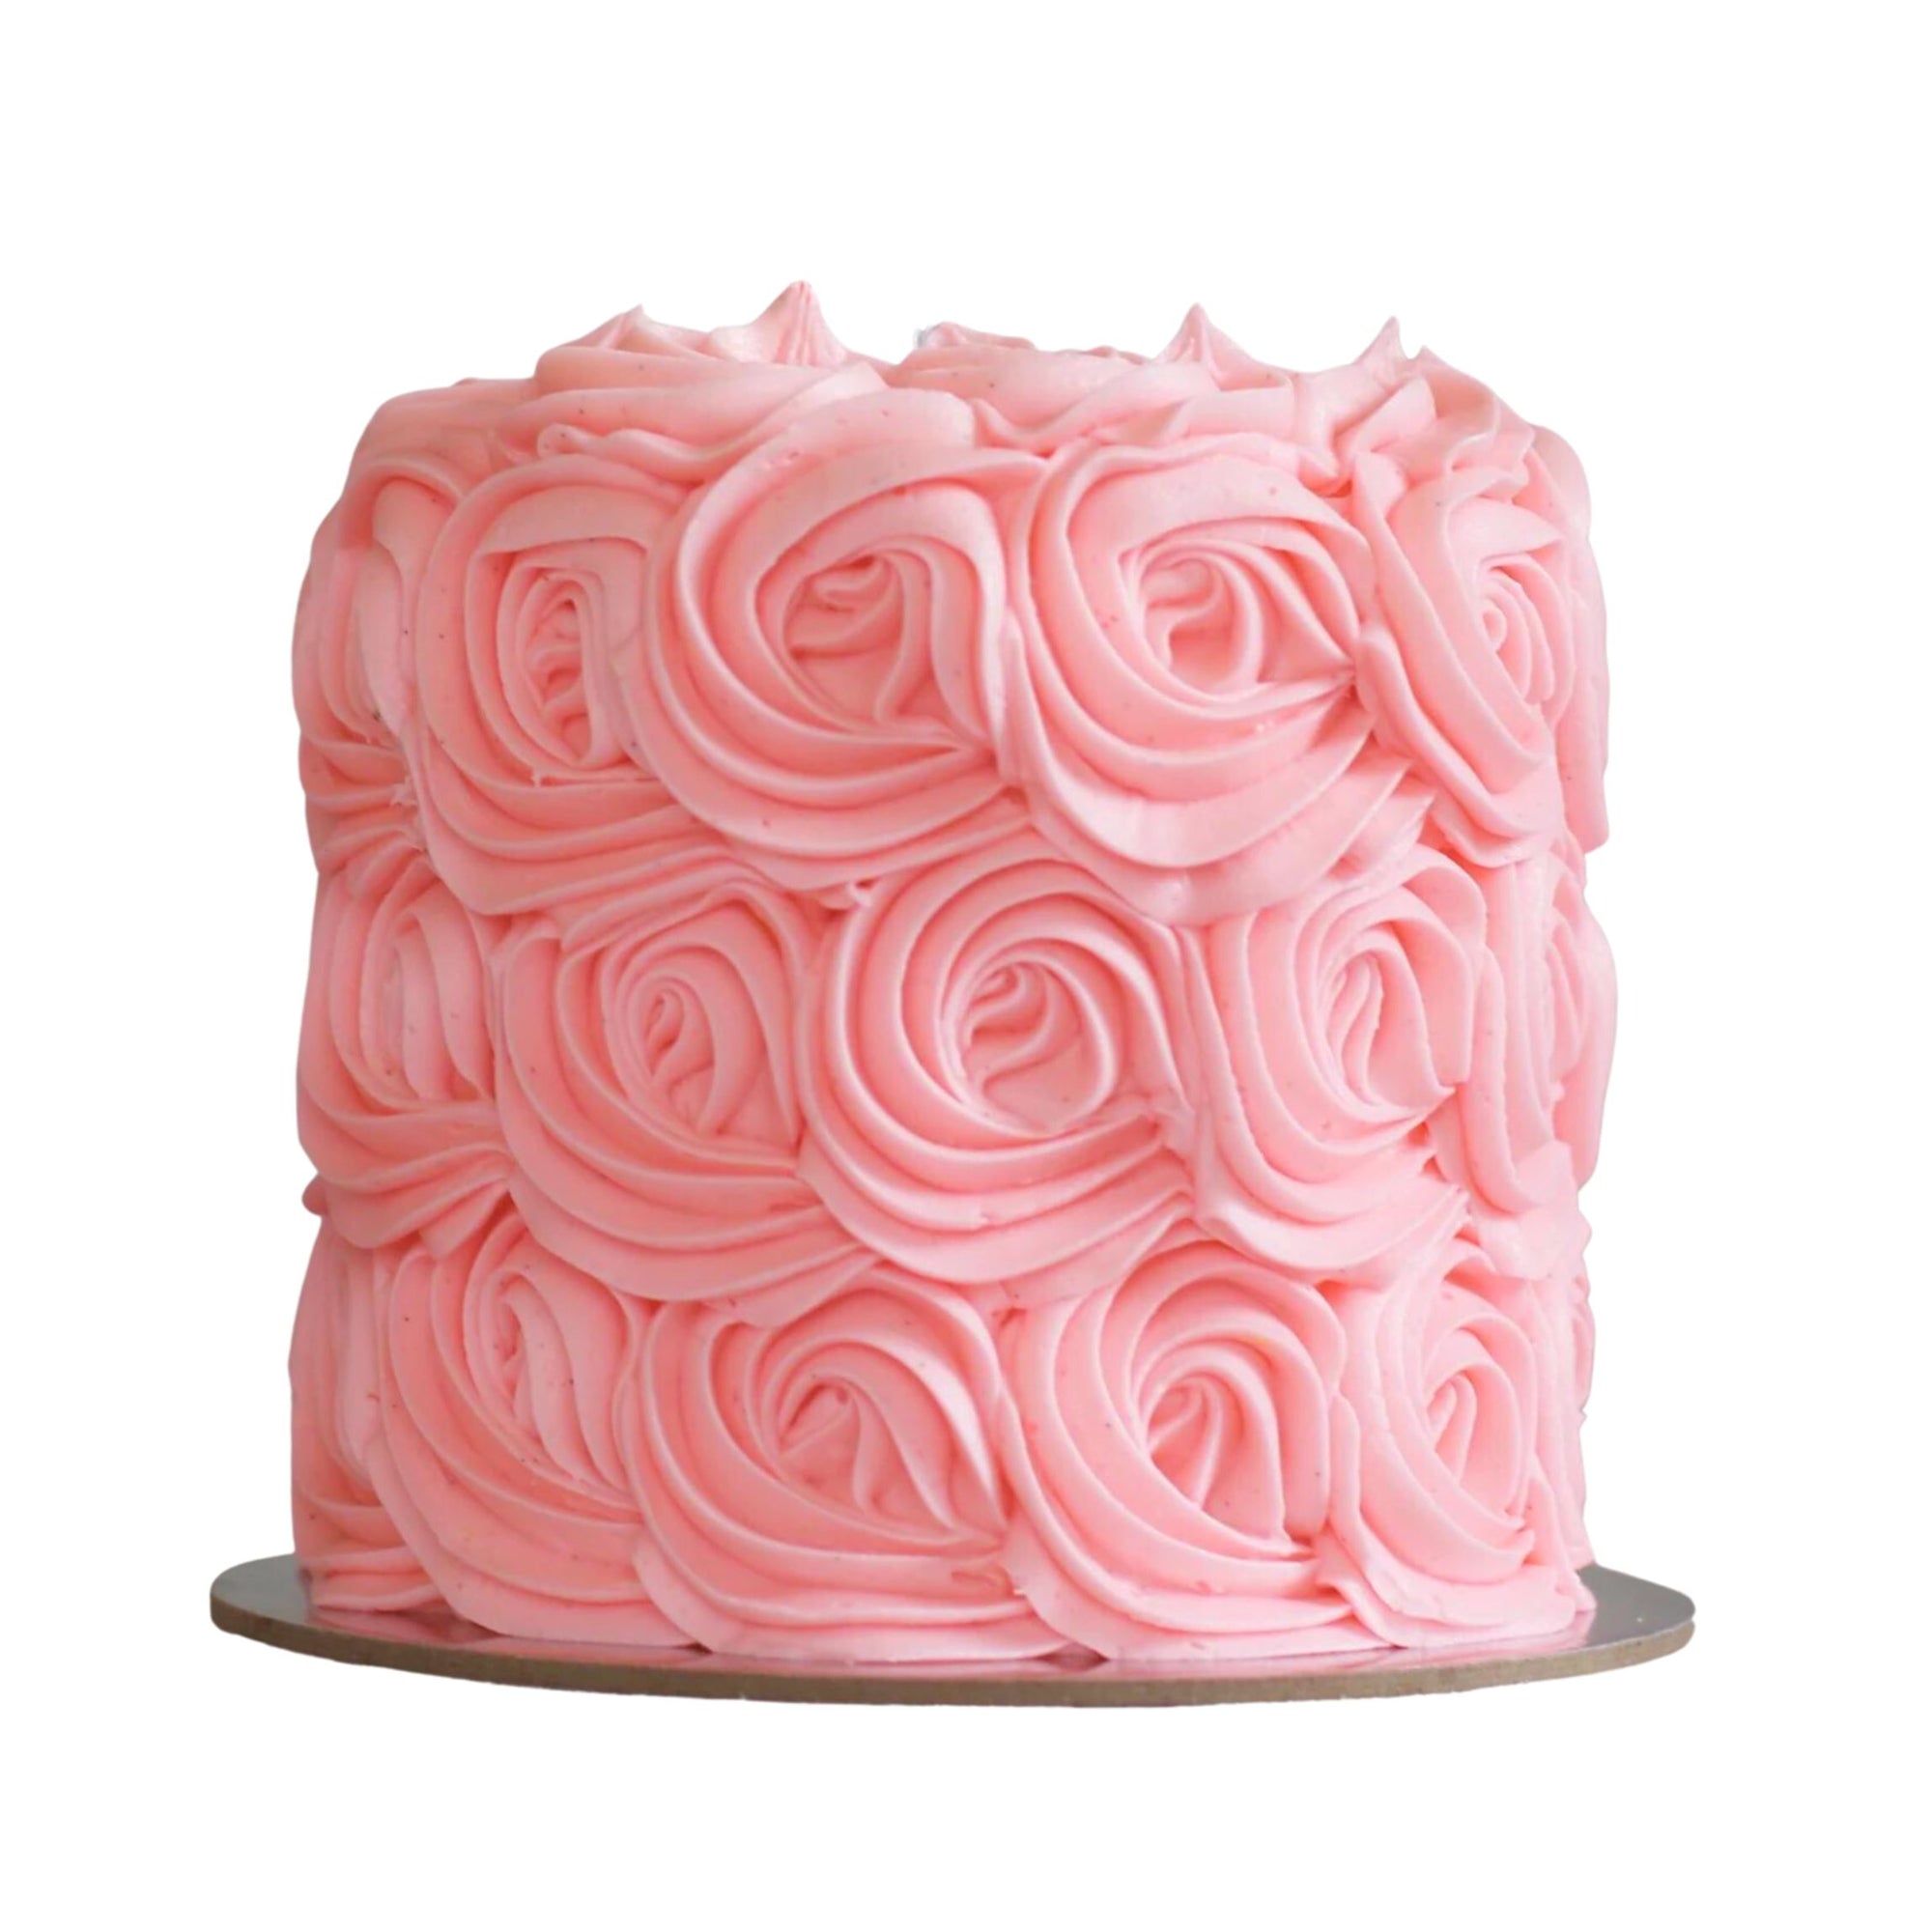 Pink Swirl Cake Cakes The Cupcake Queens 